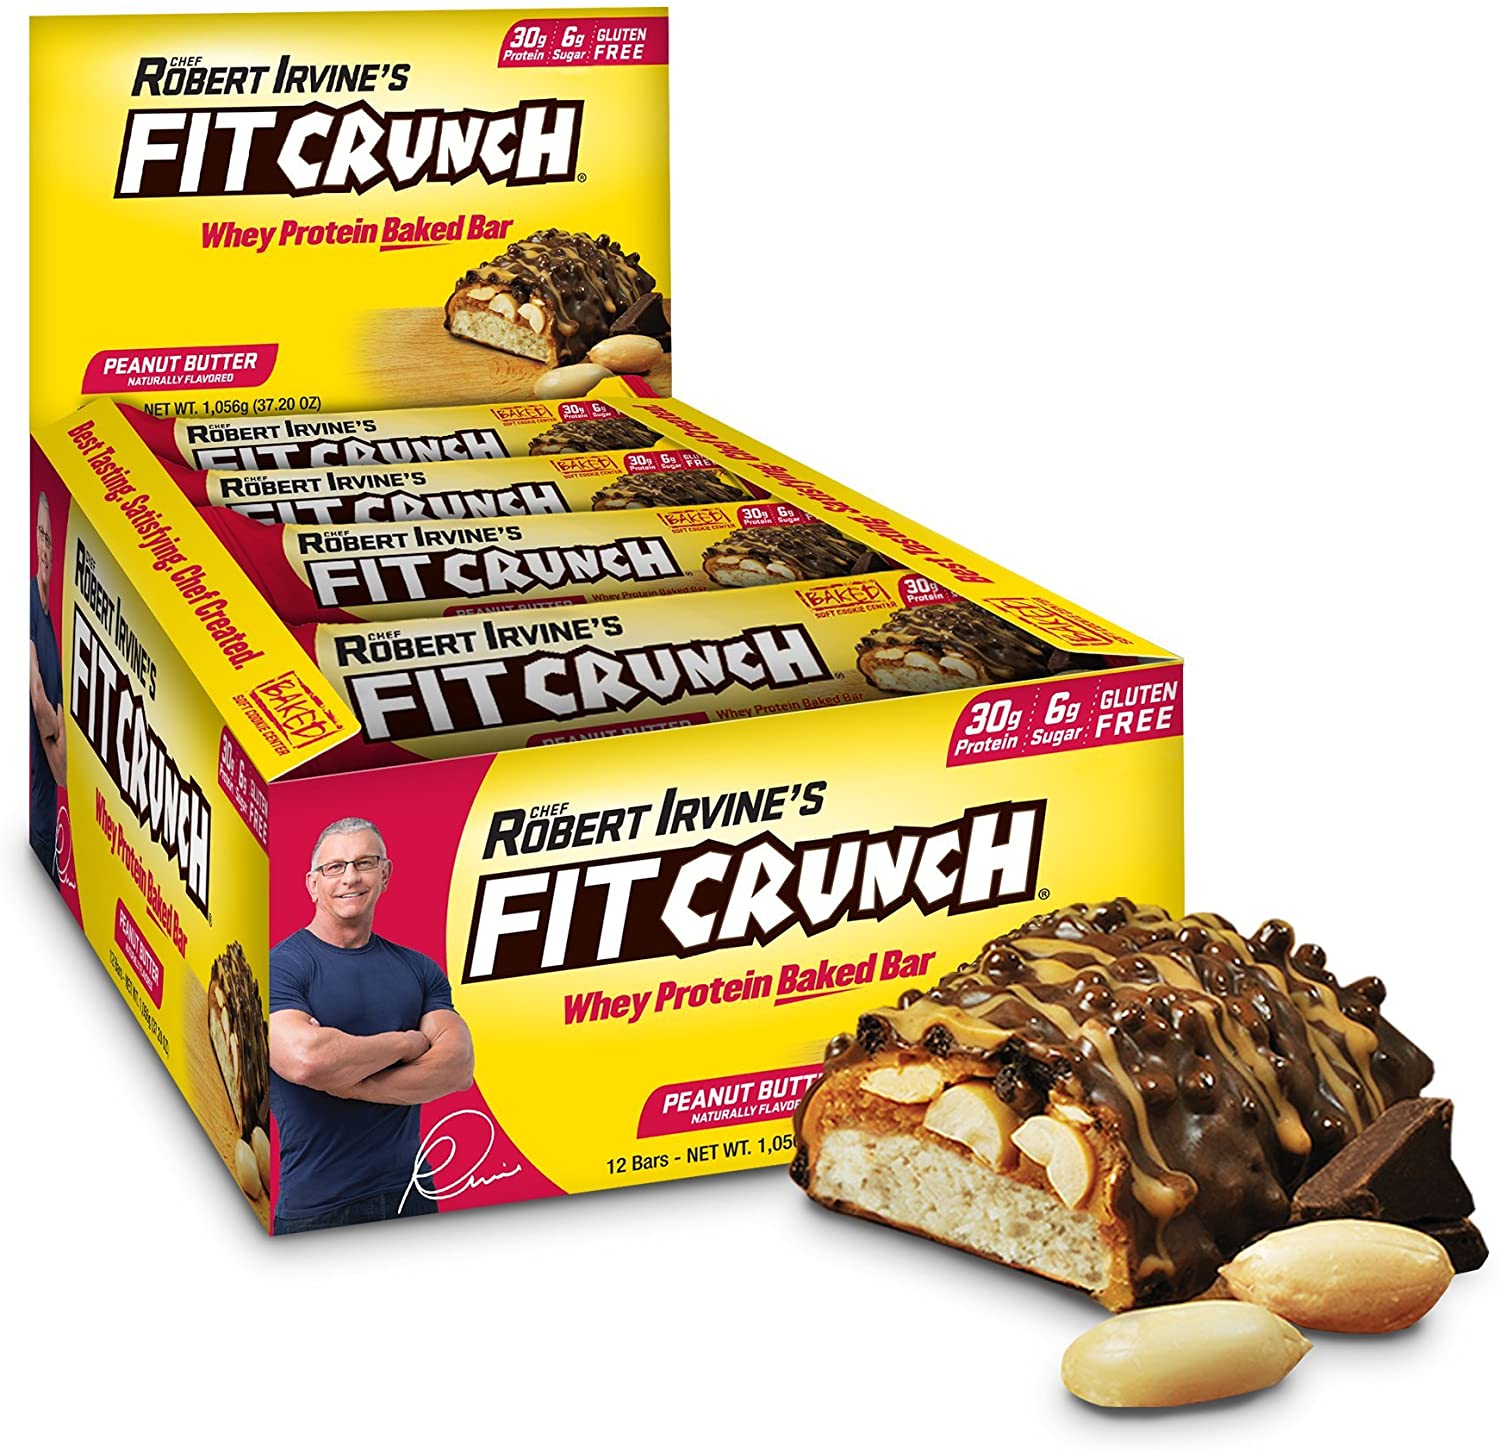 FITCRUNCH Peanut Butter Whey Protein Bar, 12-Count